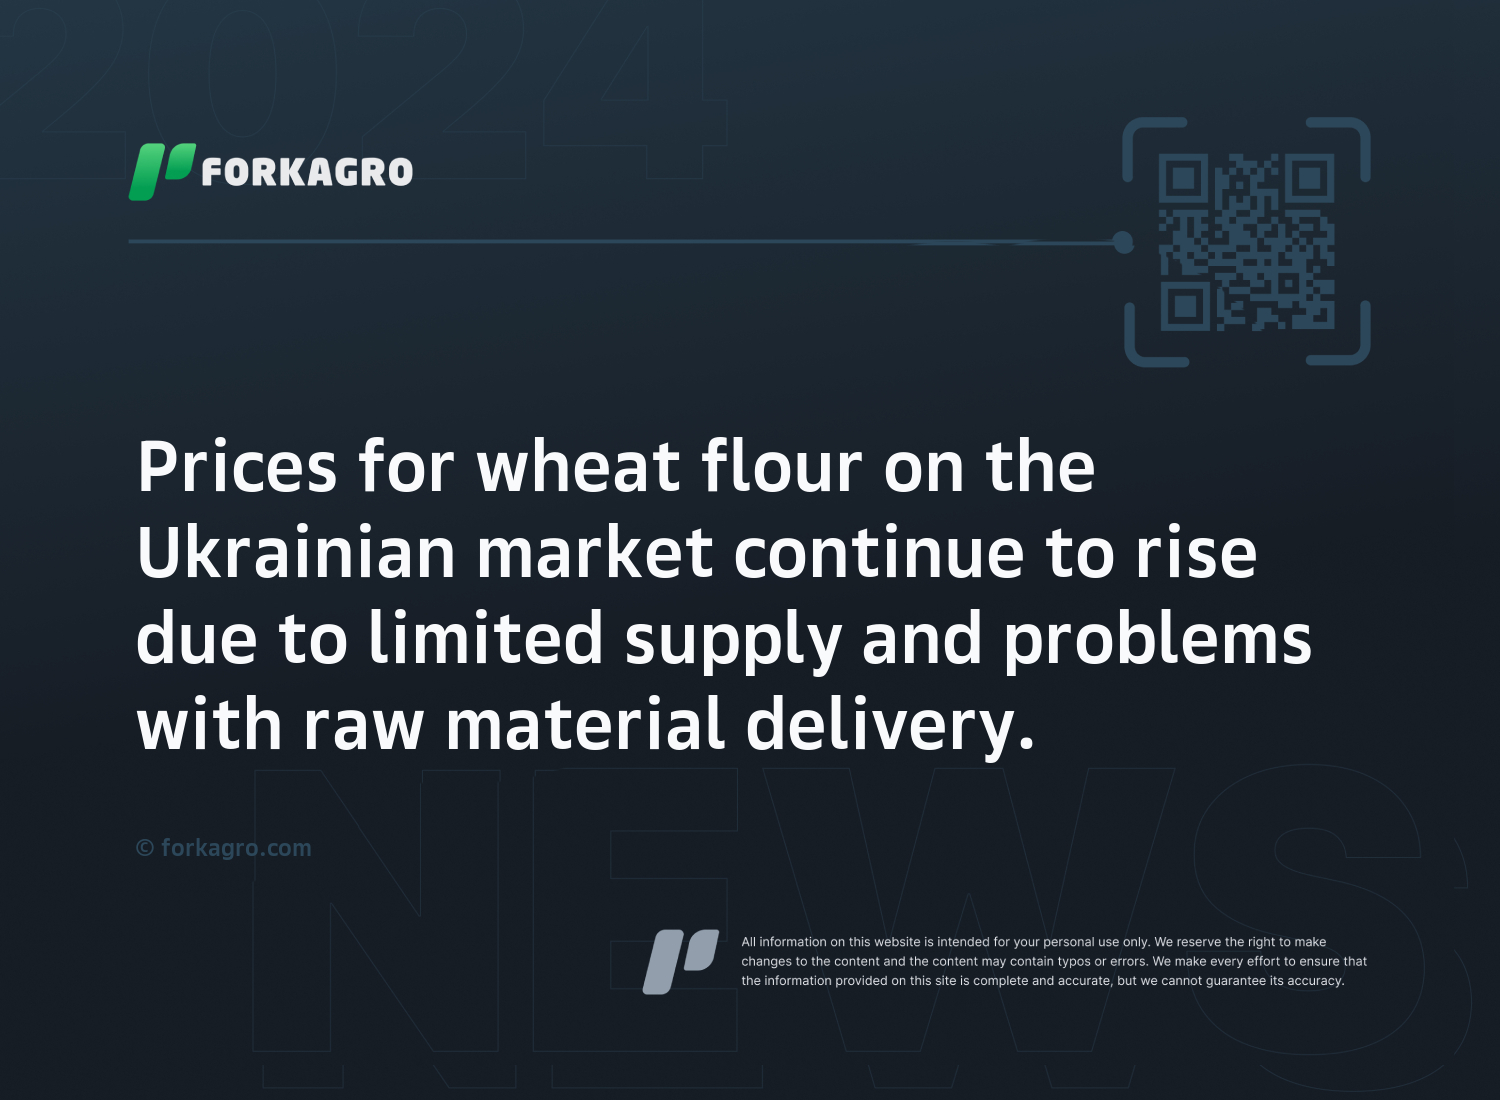 Prices for wheat flour on the Ukrainian market continue to rise due to limited supply and problems with raw material delivery.